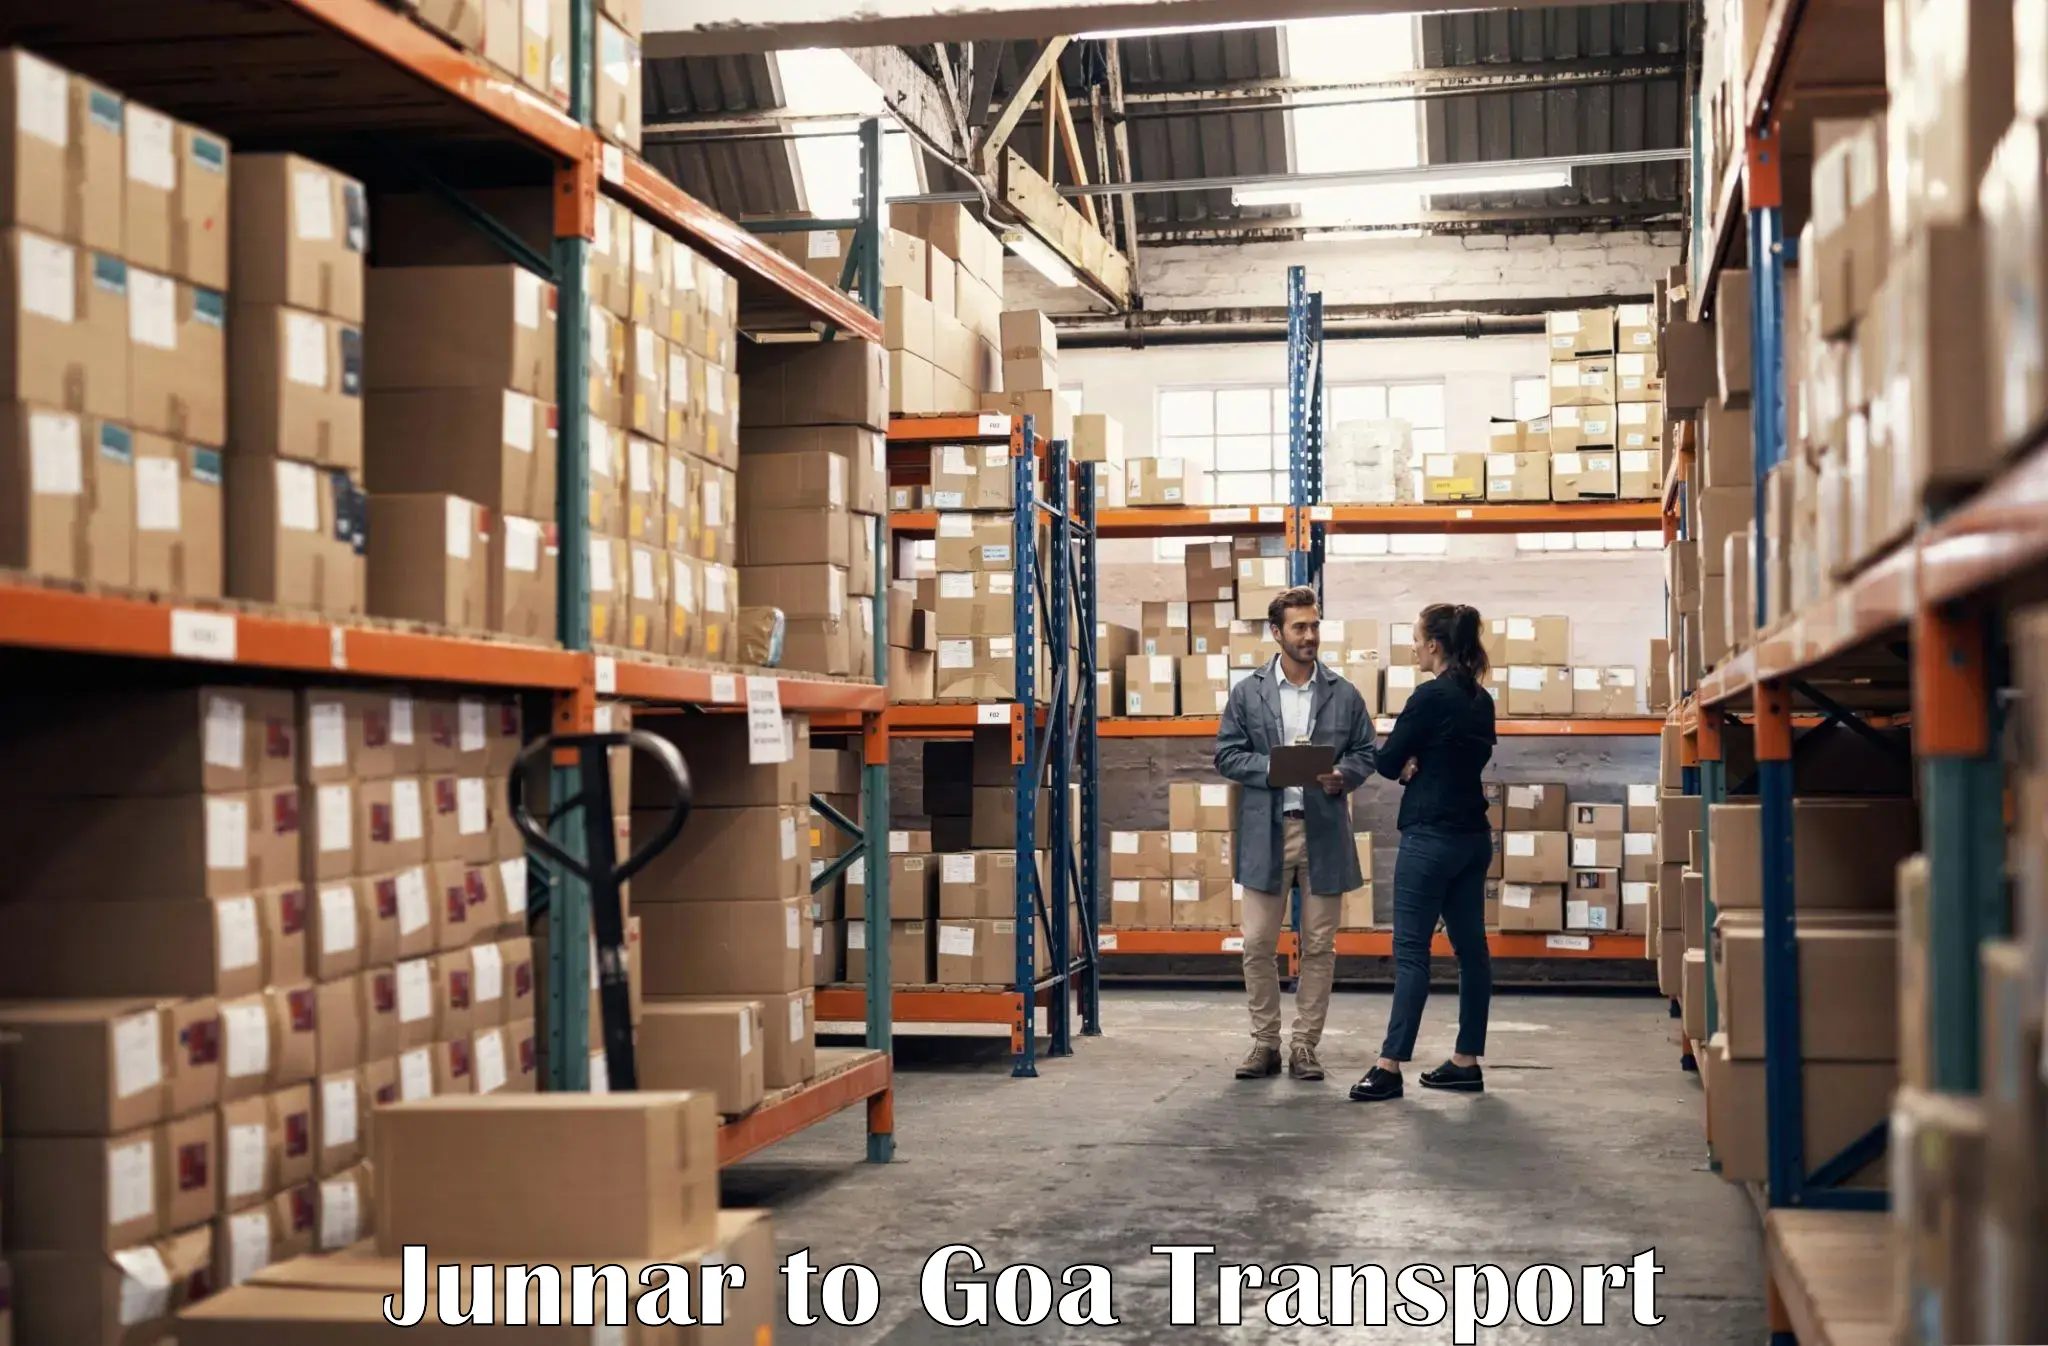 Daily transport service Junnar to Goa